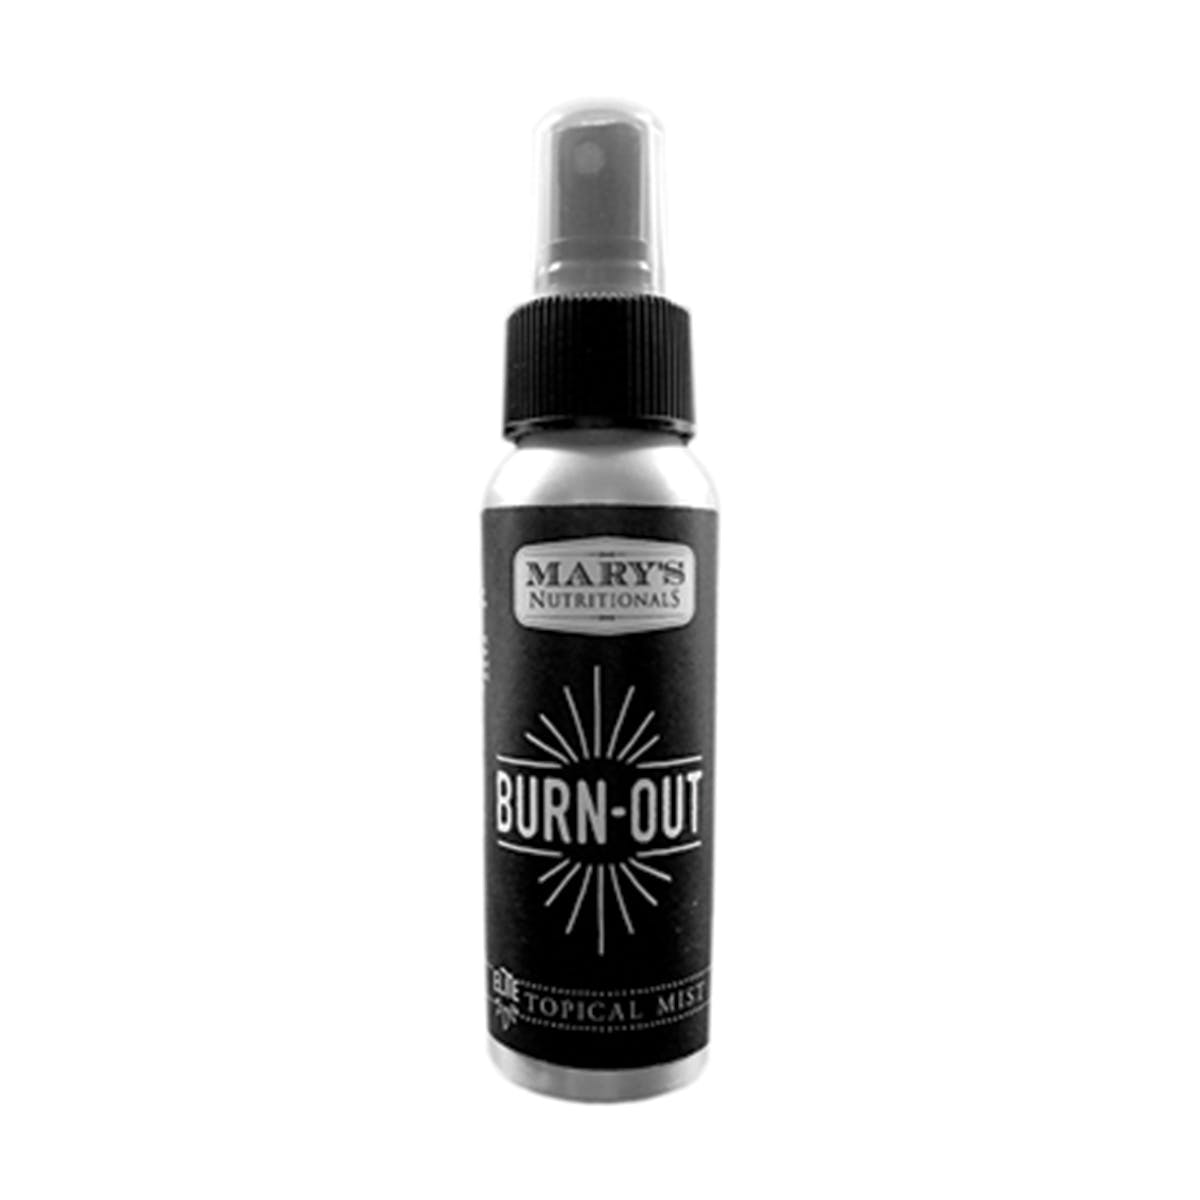 Burn-Out Topical Mist